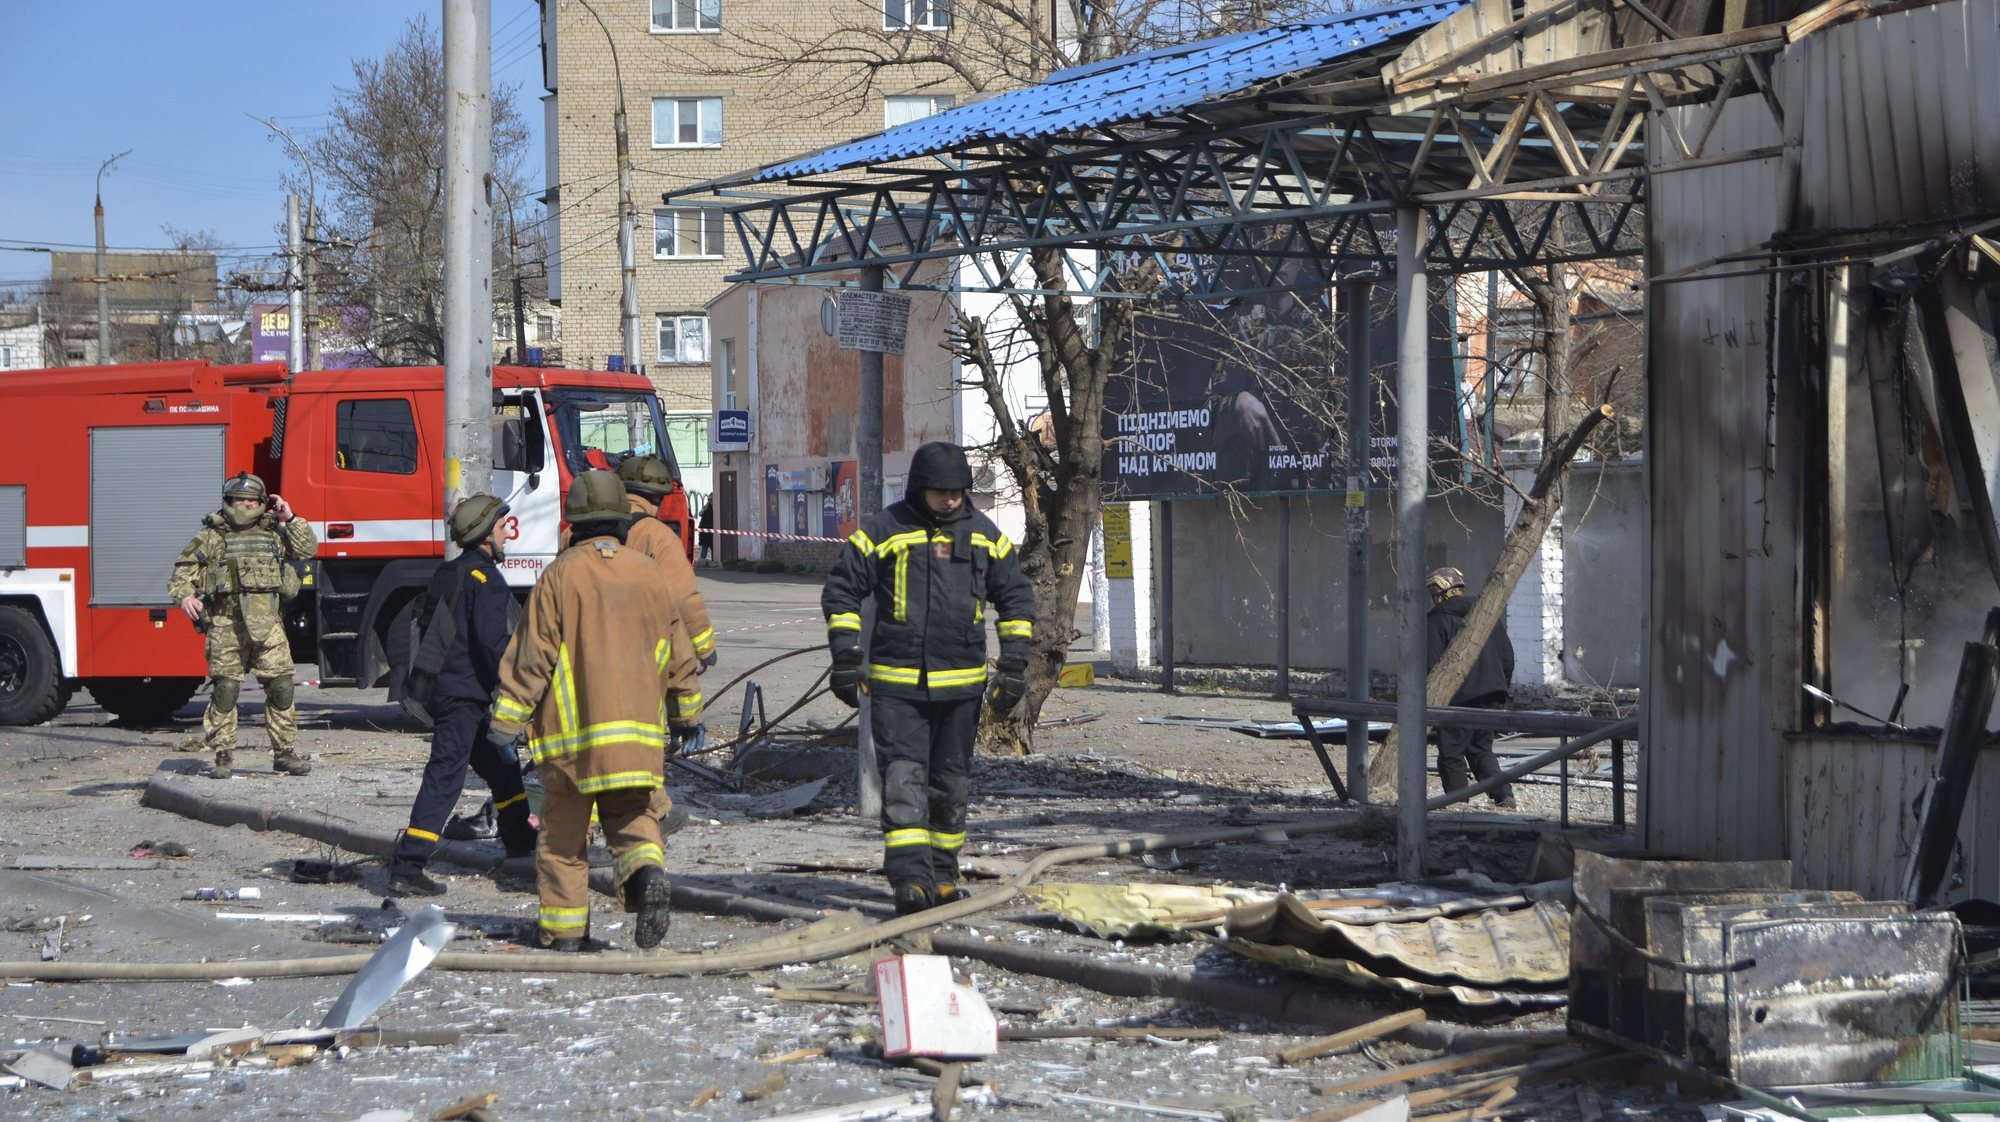 epa10511390 Rescuers work at a bus stop which was hit during a rocket attack in Kherson which resulted in the death of at least three people according to a spokesman from the President&#039;s office. Ukraine, 09 March 2023. Ukrainian authorities said on 09 March that Russia fired 81 missiles across the country targeting critical infrastructure and residential buildings. The country&#039;s Defense Ministry confirmed that 34 cruise missiles were shot down. According to Ukraine&#039;s nuclear operator Energoatom, the Zaporizhzhia nuclear power plant (NPP) lost power as a result of the missile attacks, and was running on diesel generators.  EPA/IVAN ANTYPENKO